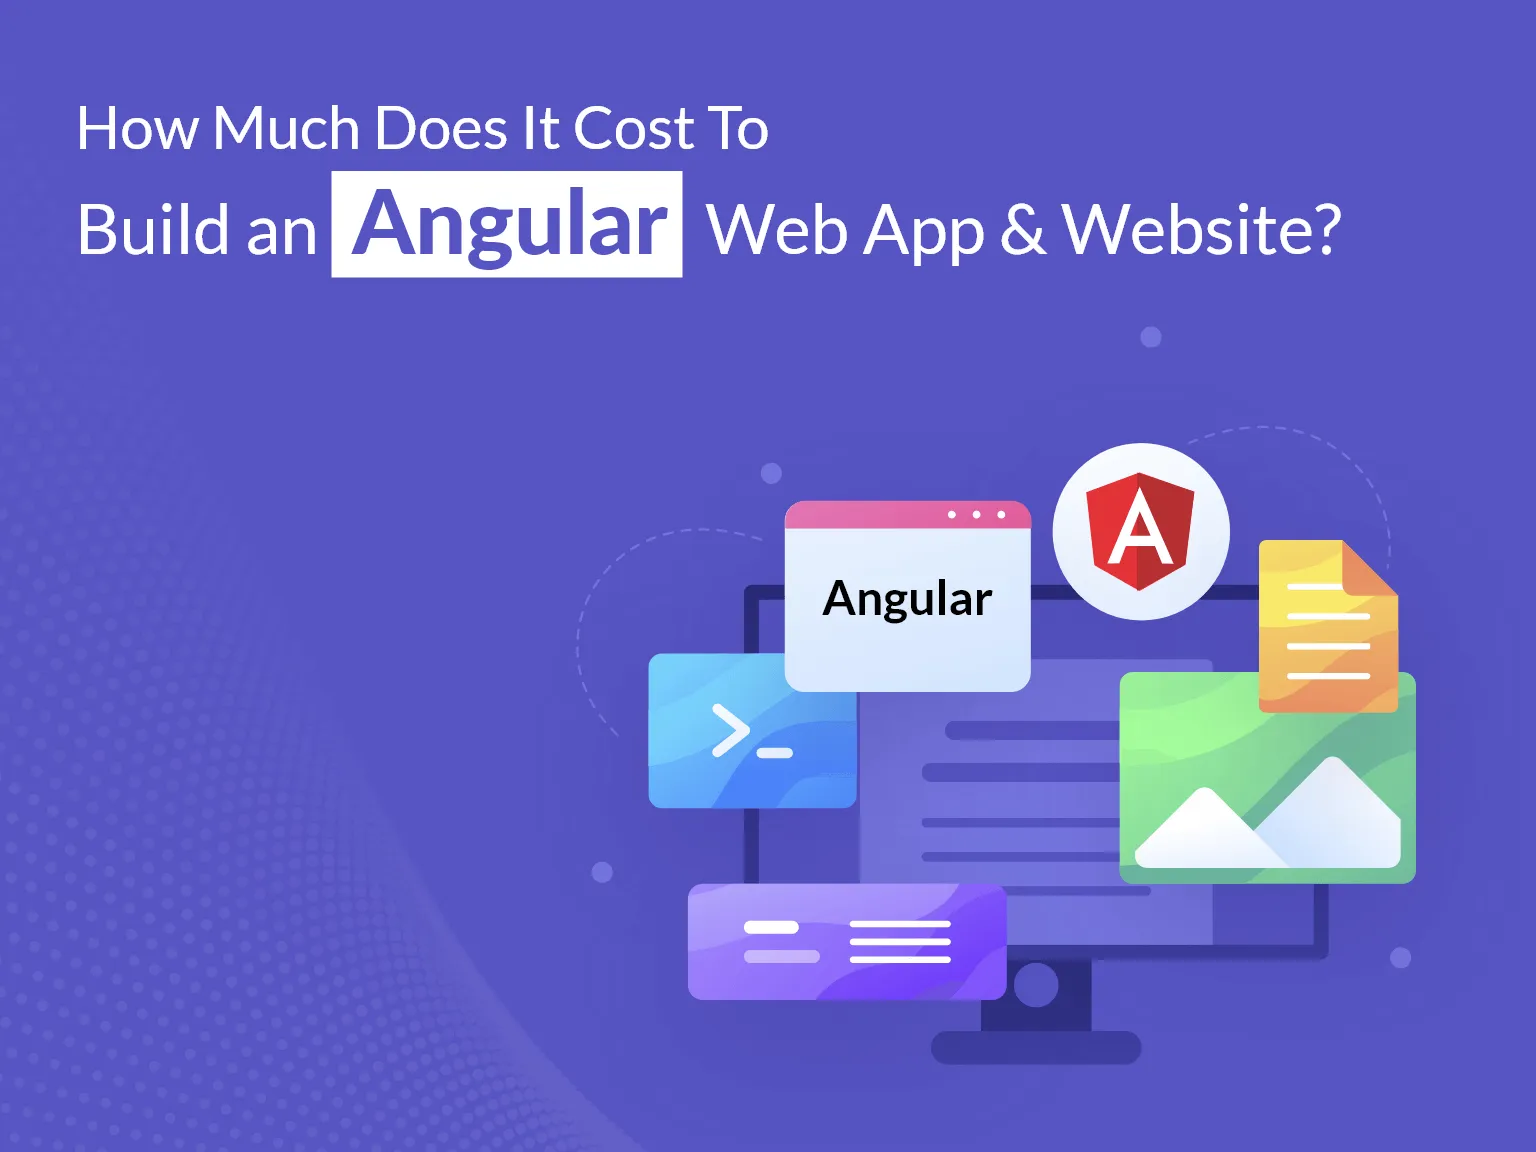 How Much Does It Cost To Develop An Angular Web App?